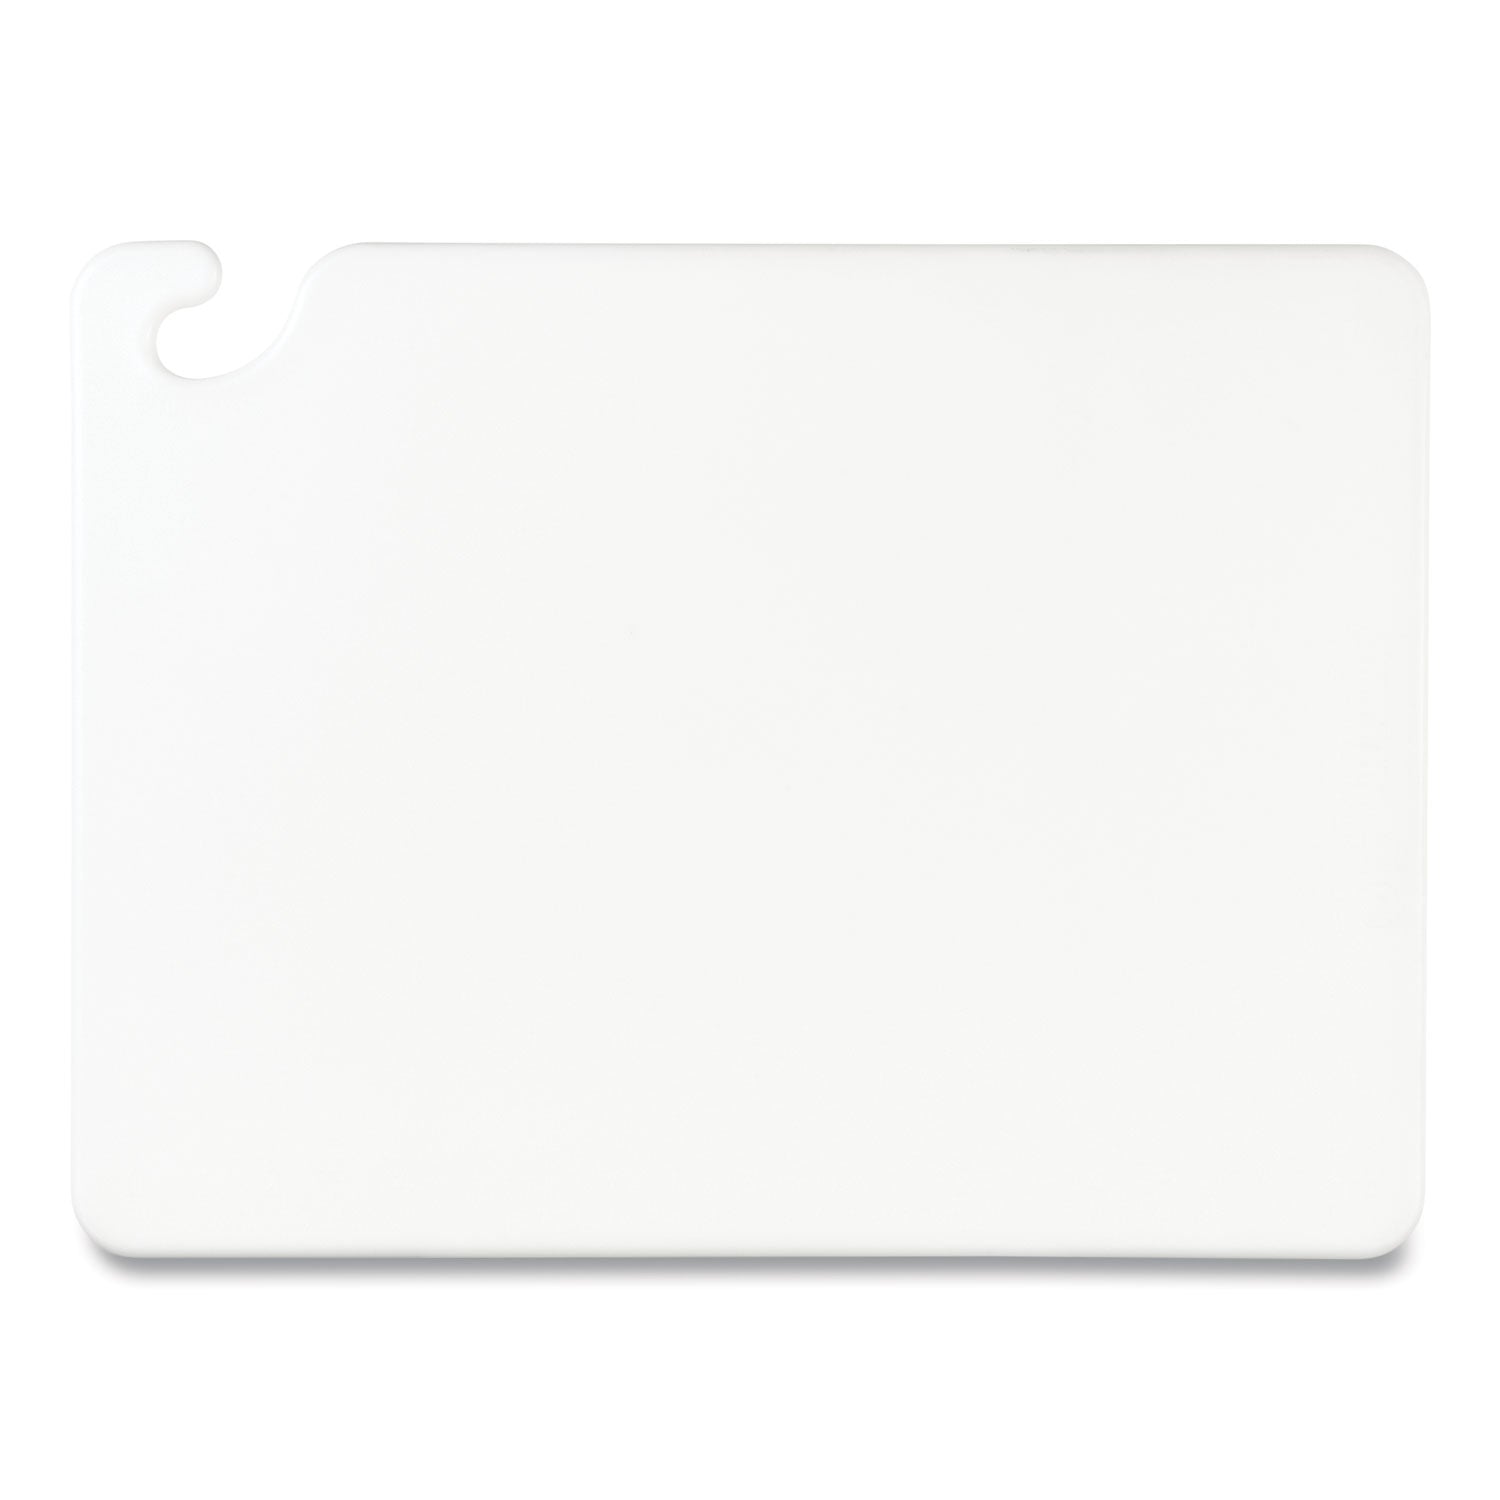 cut-n-carry-color-cutting-boards-plastic-20-x-15-x-05-white_sjmcb152012wh - 3